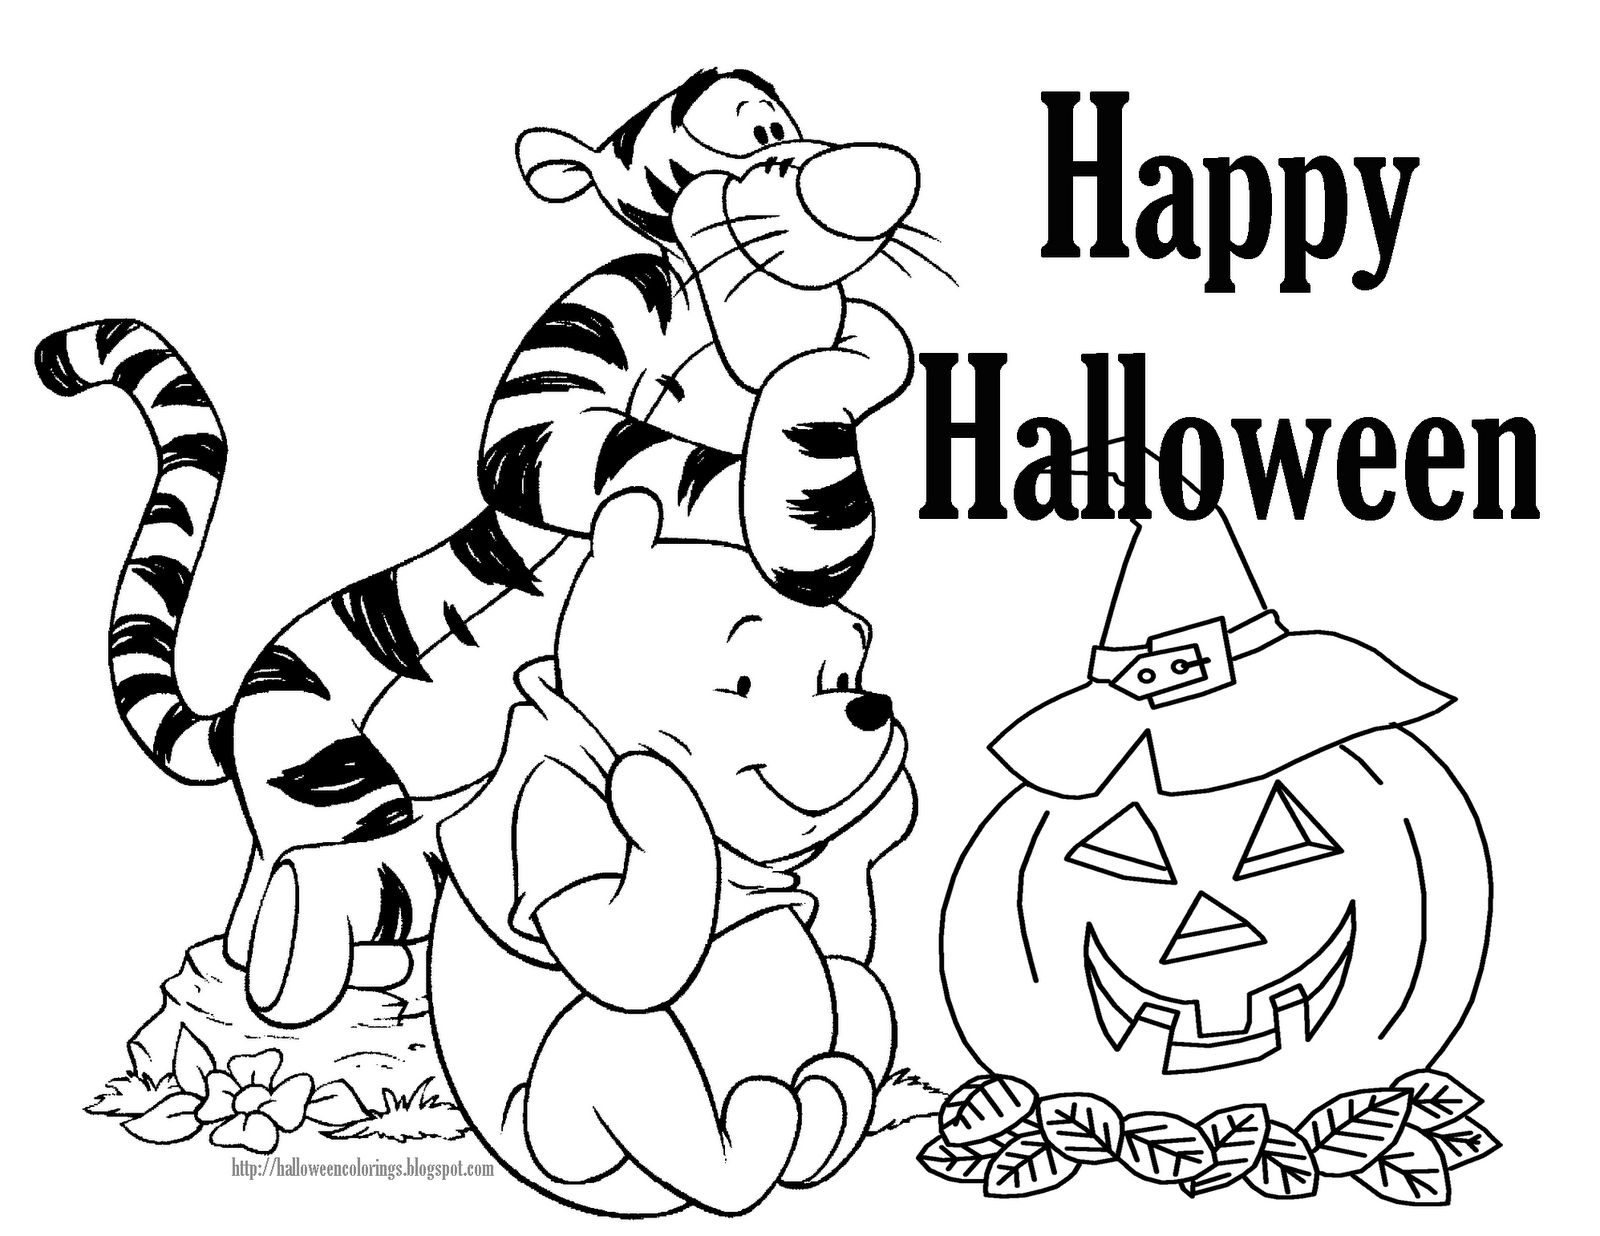 Free Disney Halloween Coloring Pages Lovebugs And Postcards Halloween Coloring Pages